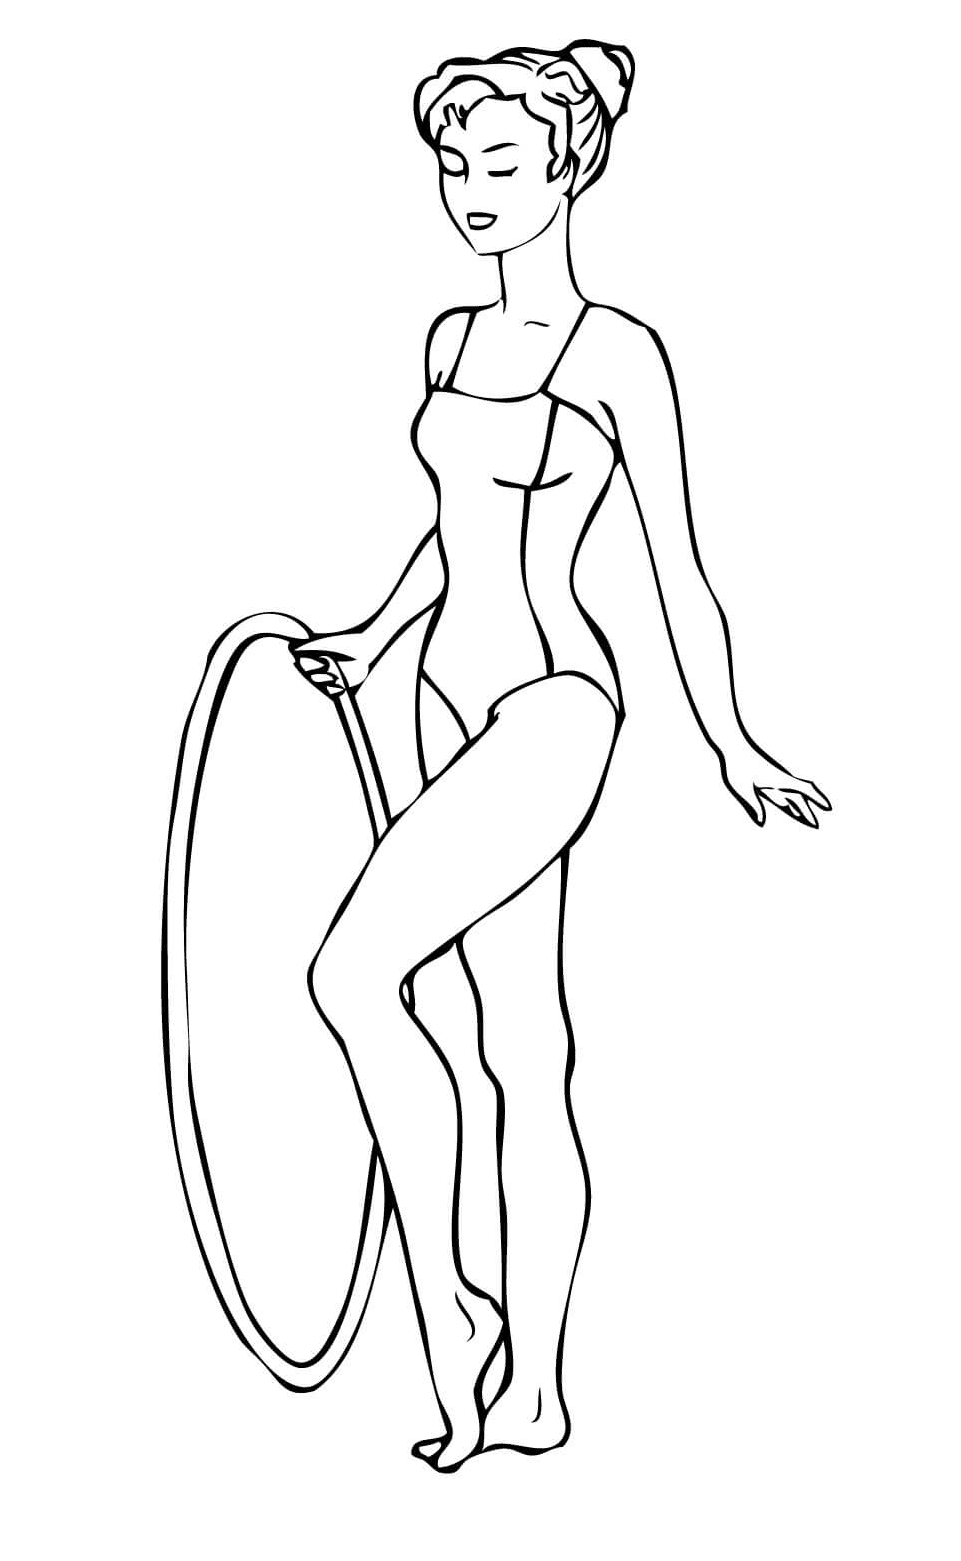 Gymnastics Routine with a Hoop Coloring Page